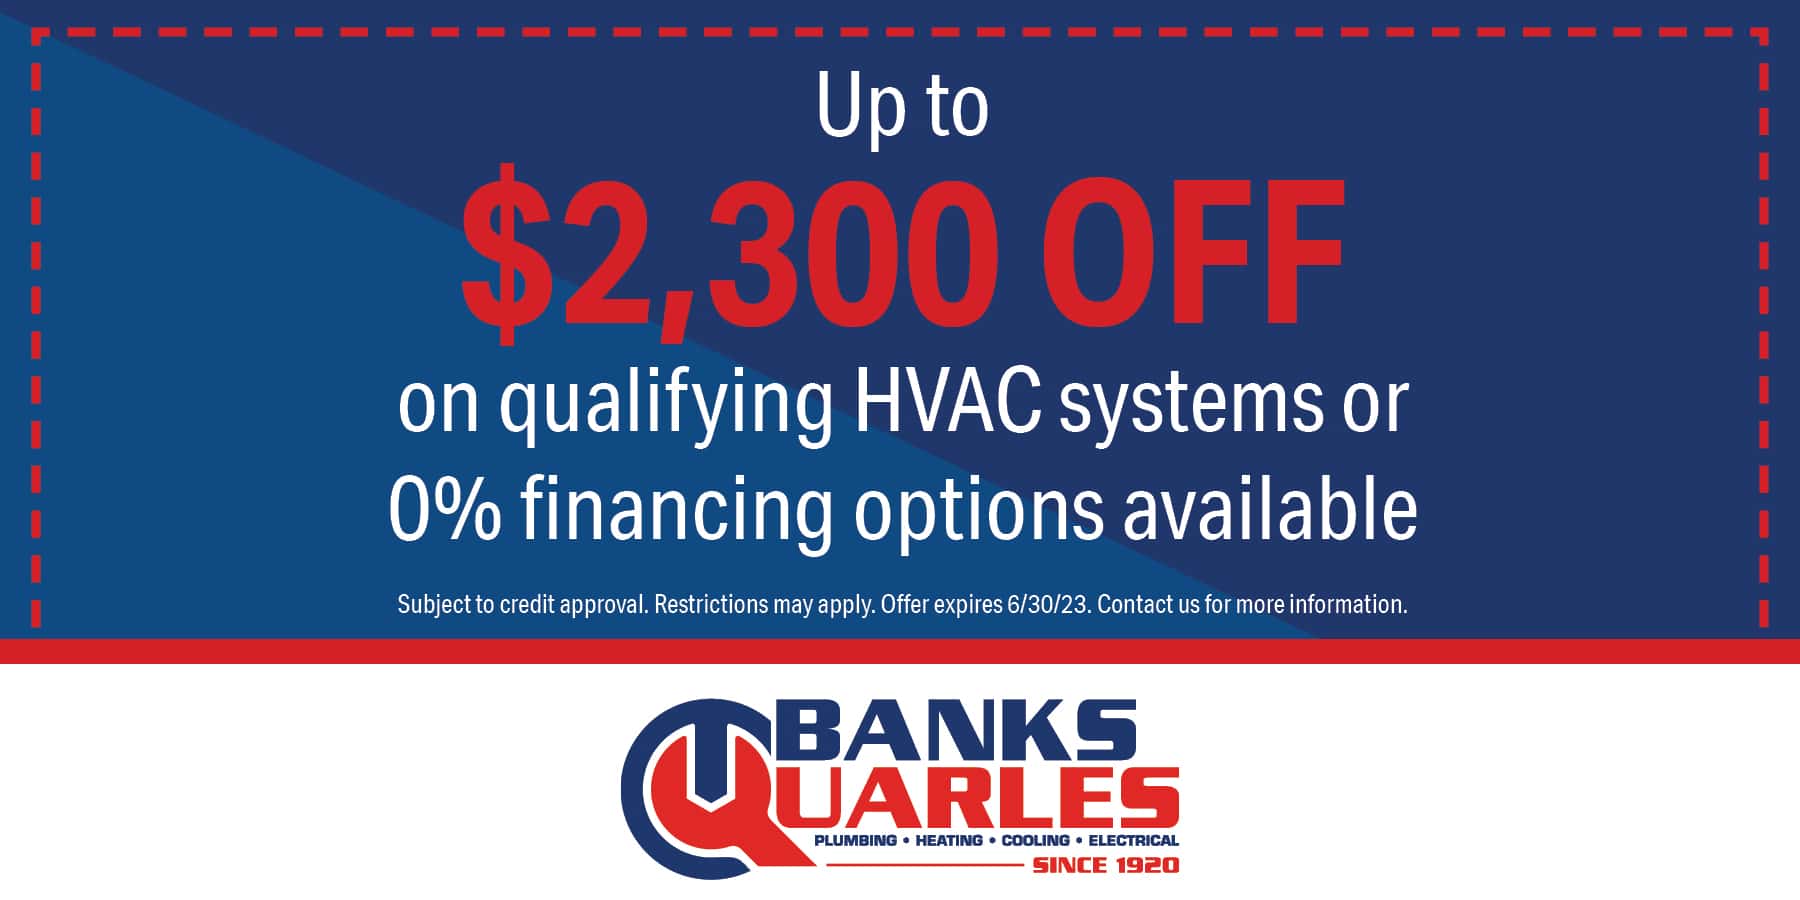 $2300 off a qualifying hvac system or 0% financing options. Subject to credit approval. Restrictions may apply. Contact us for details.